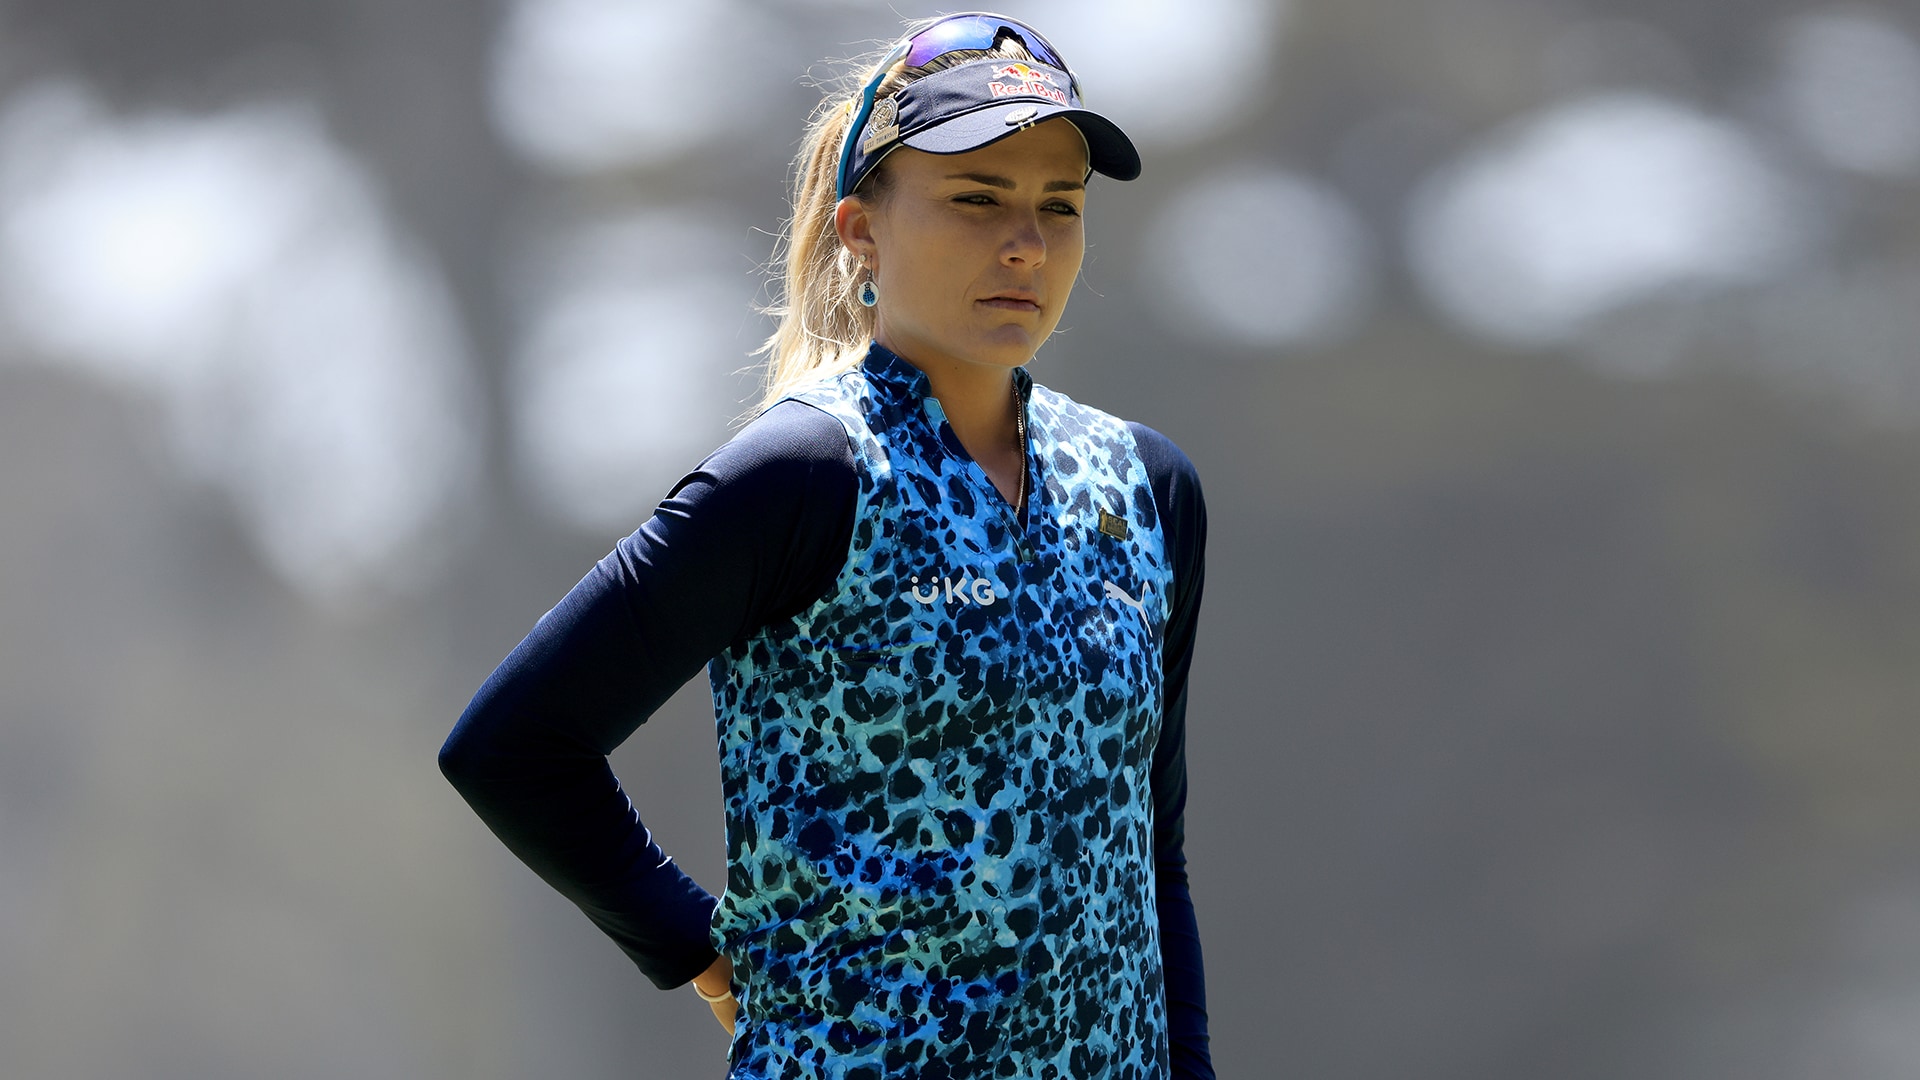 Lexi Thompson’s year highlighted by painful losses and no wins after Pelican loss